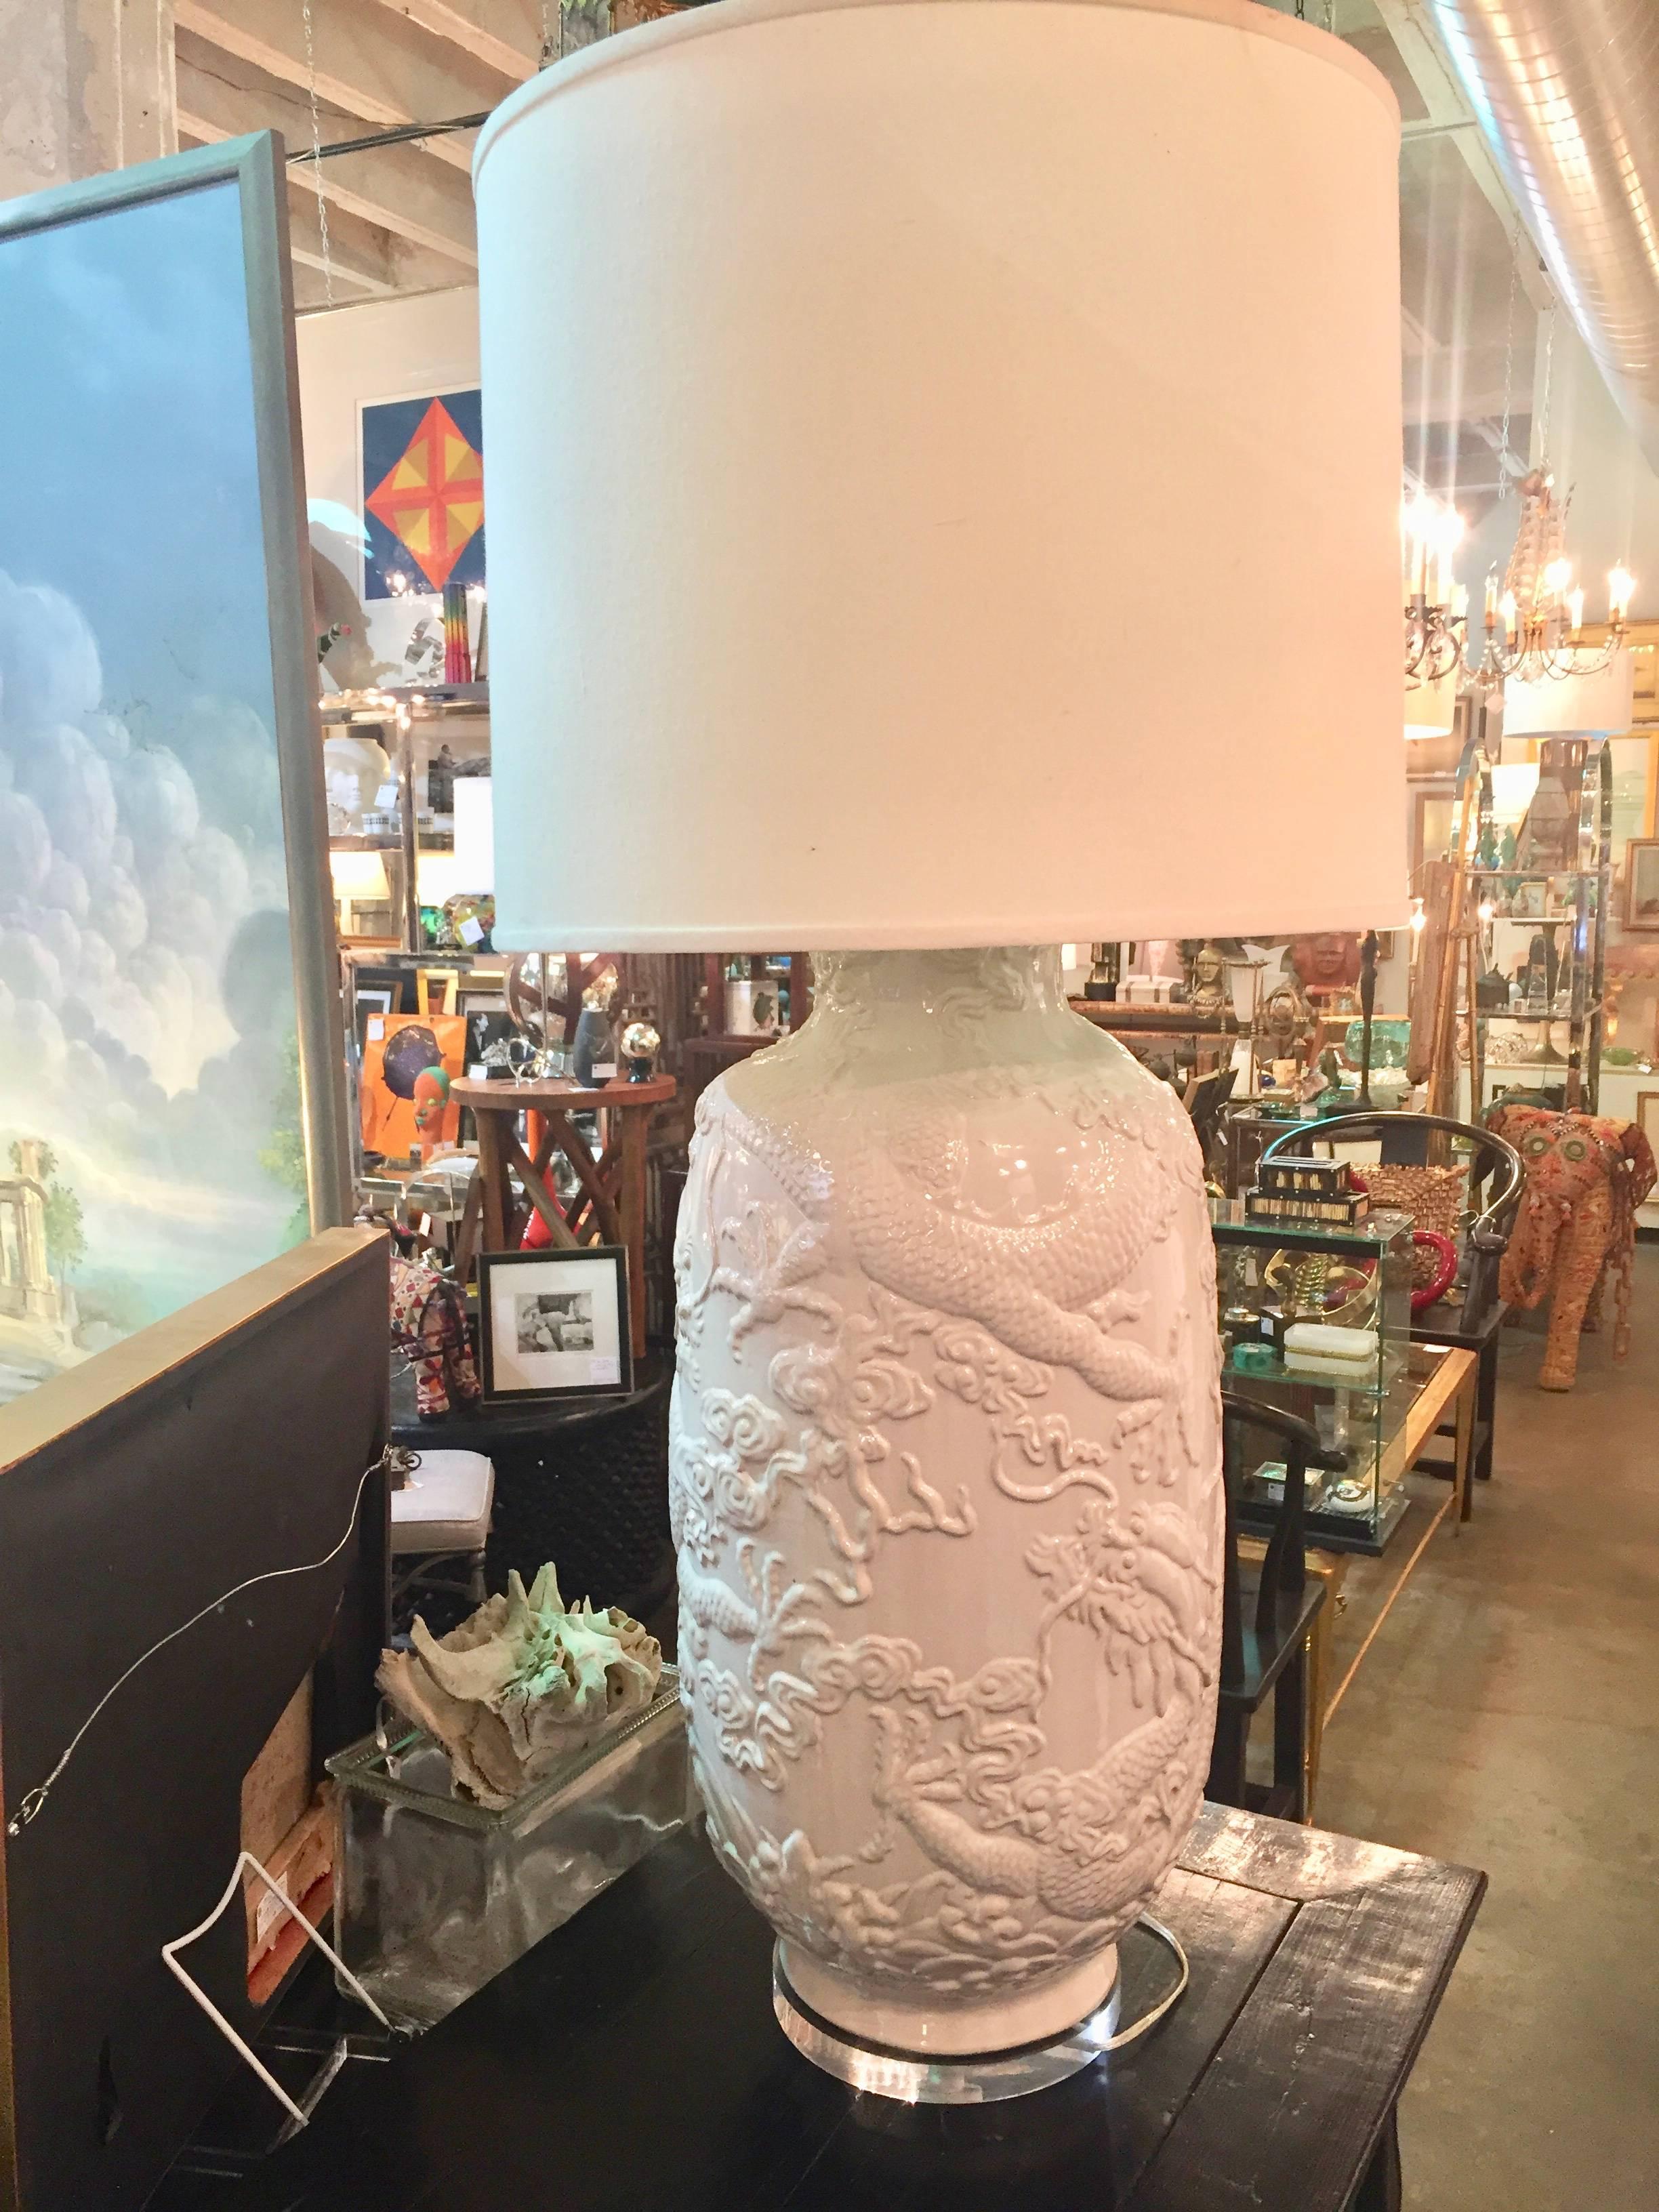 Impressive pair of Palace size white ceramic vases having raised figural snake and vine relief images now converted into table lamps. Without the shades they stand 27 inches tall.